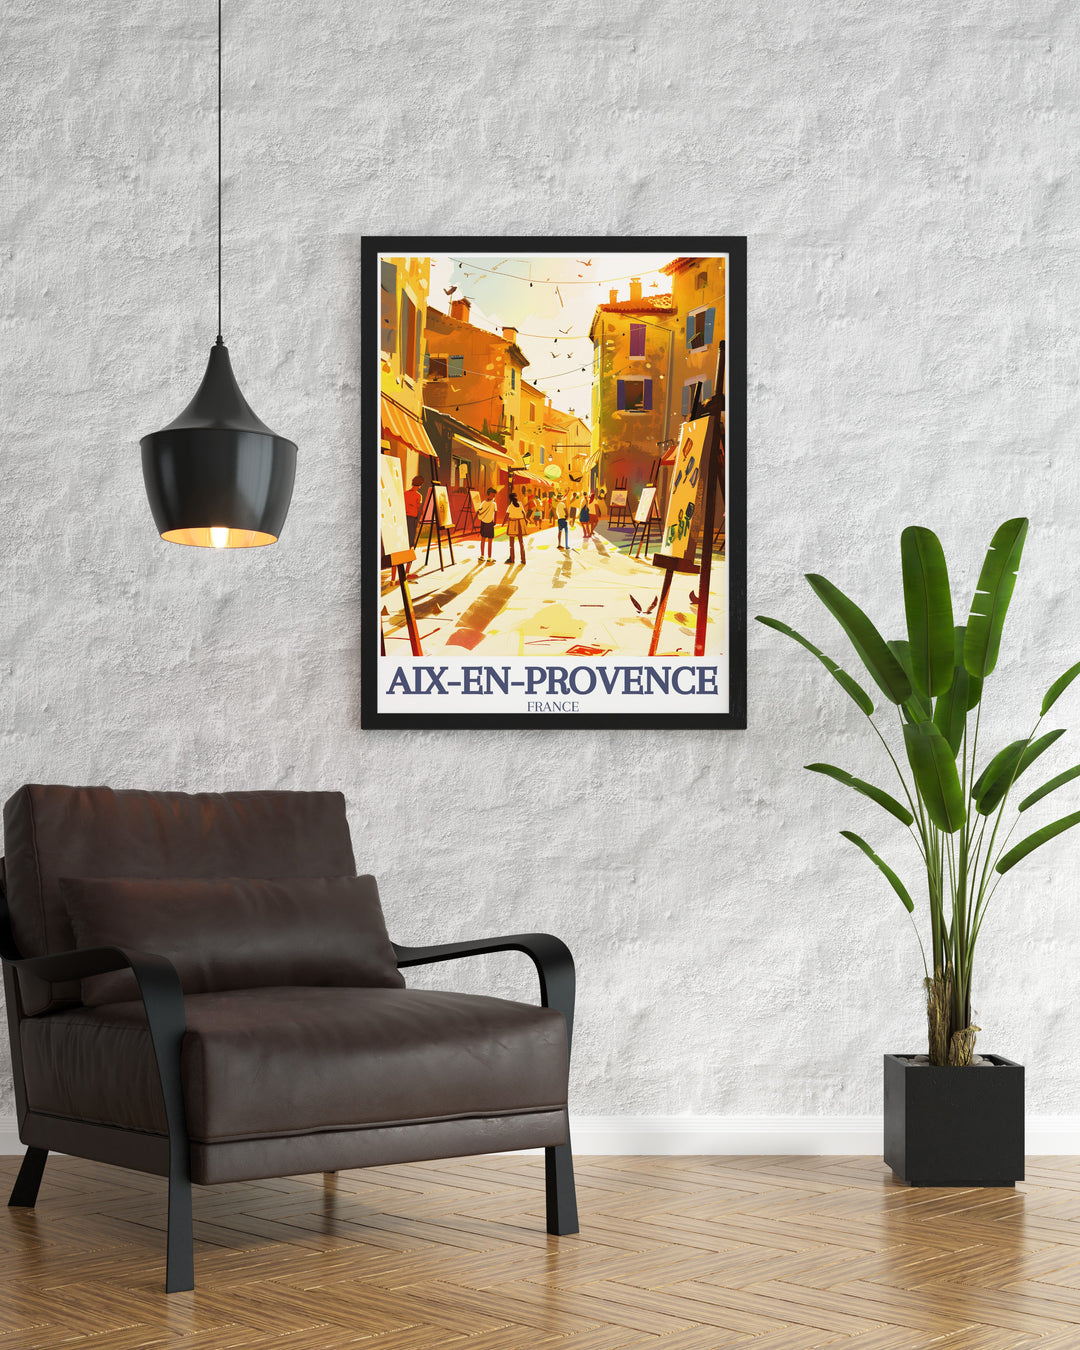 Colorful city print of Cours Mirabeau Mazarin quarter in Aix En Provence bringing the beauty and vibrancy of the area into your home decor a perfect choice for travel poster collectors